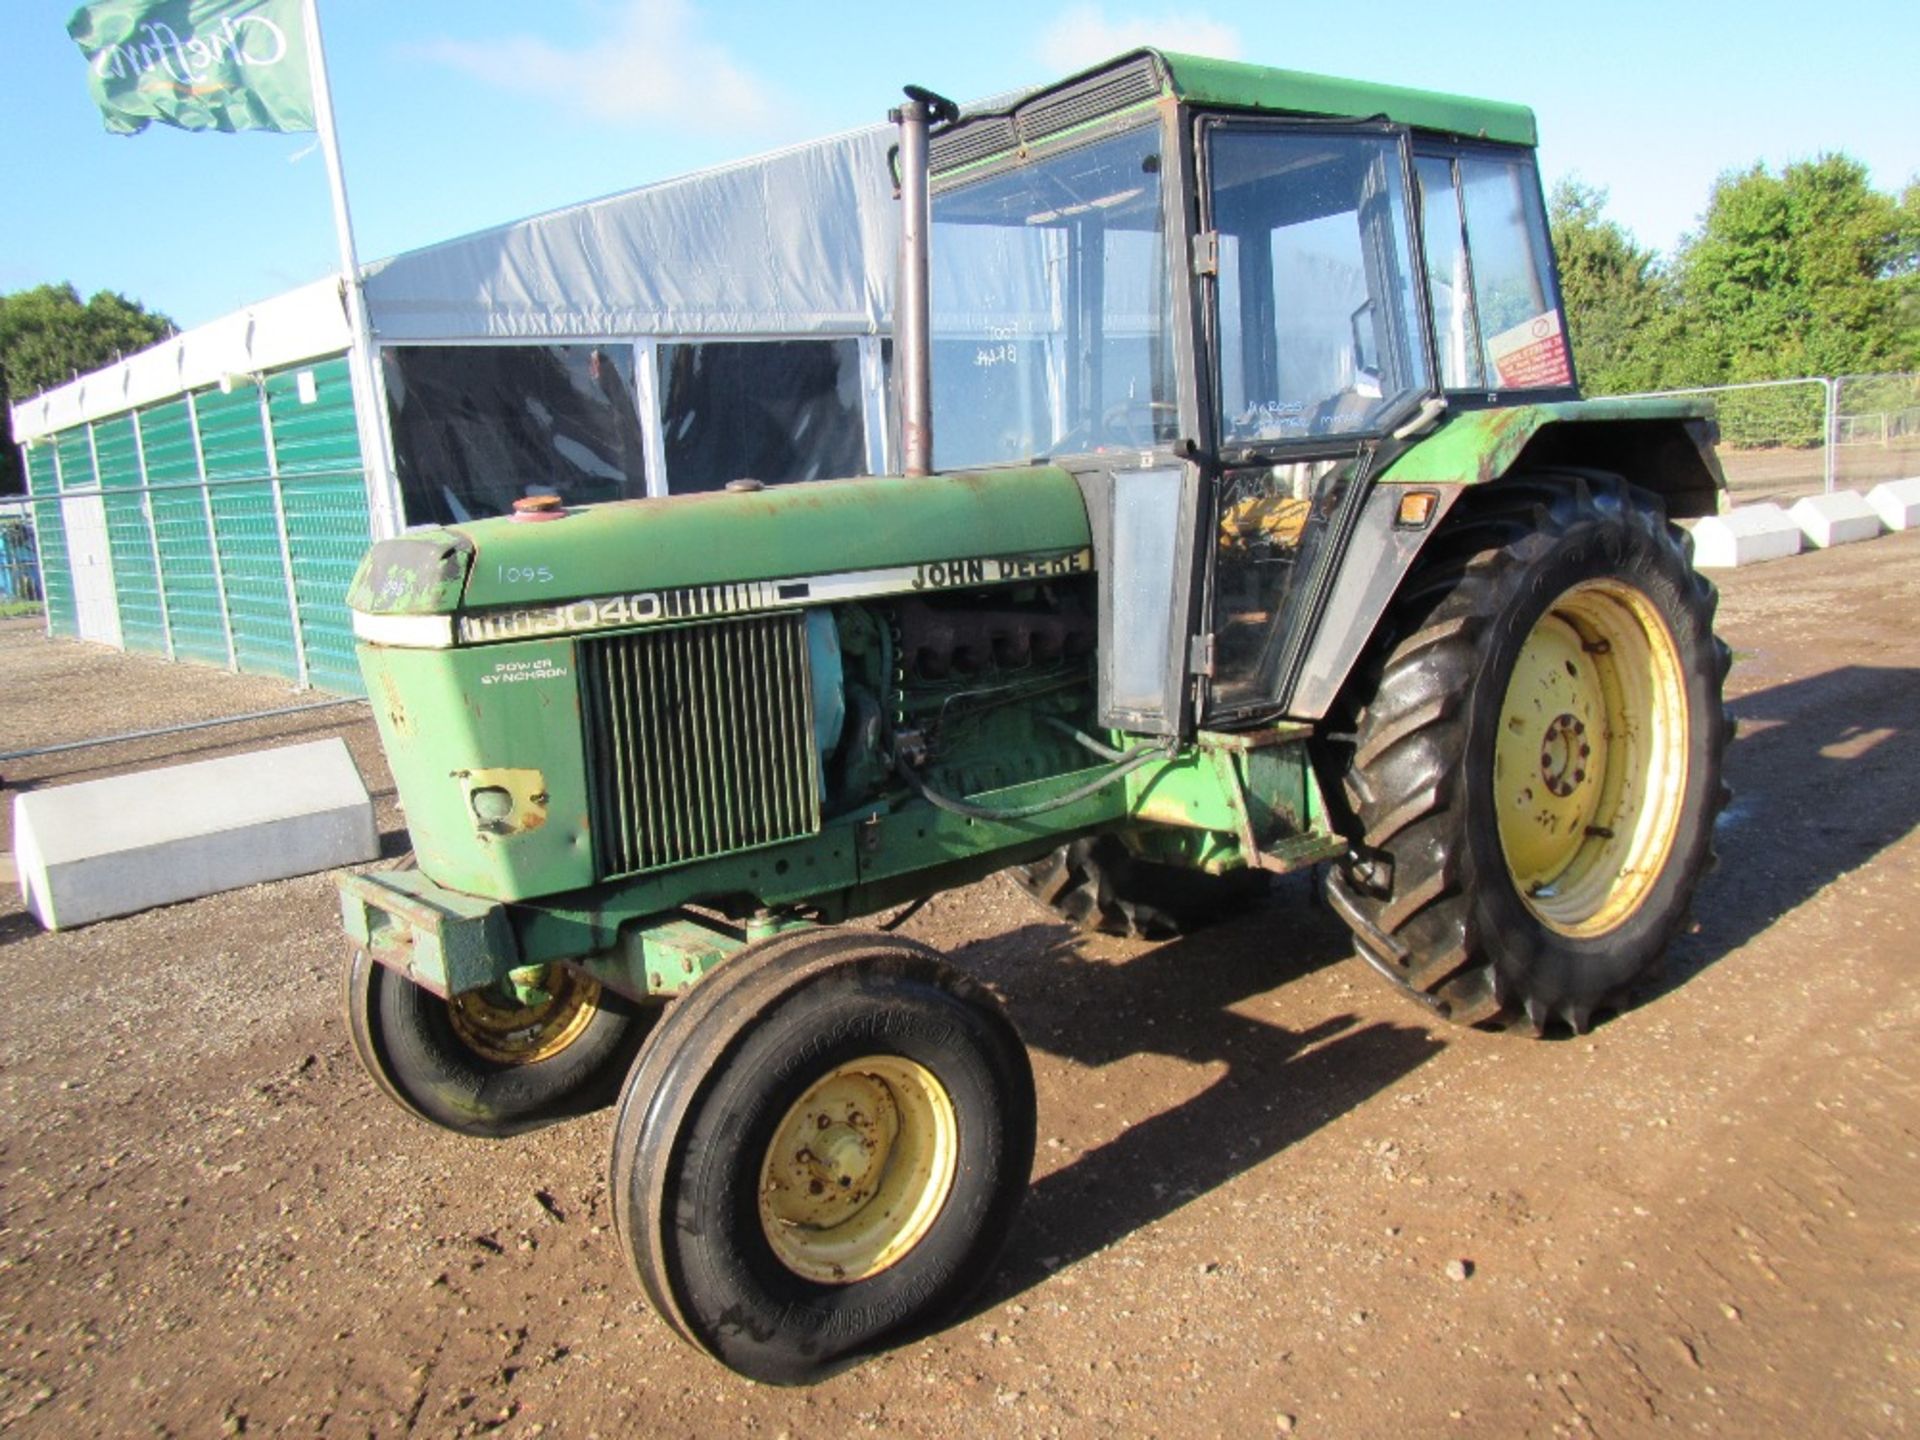 John Deere 3040 2wd Tractor with OPU Cab Reg. No. TFM 461V Ser No 364600 UNRESERVED LOT